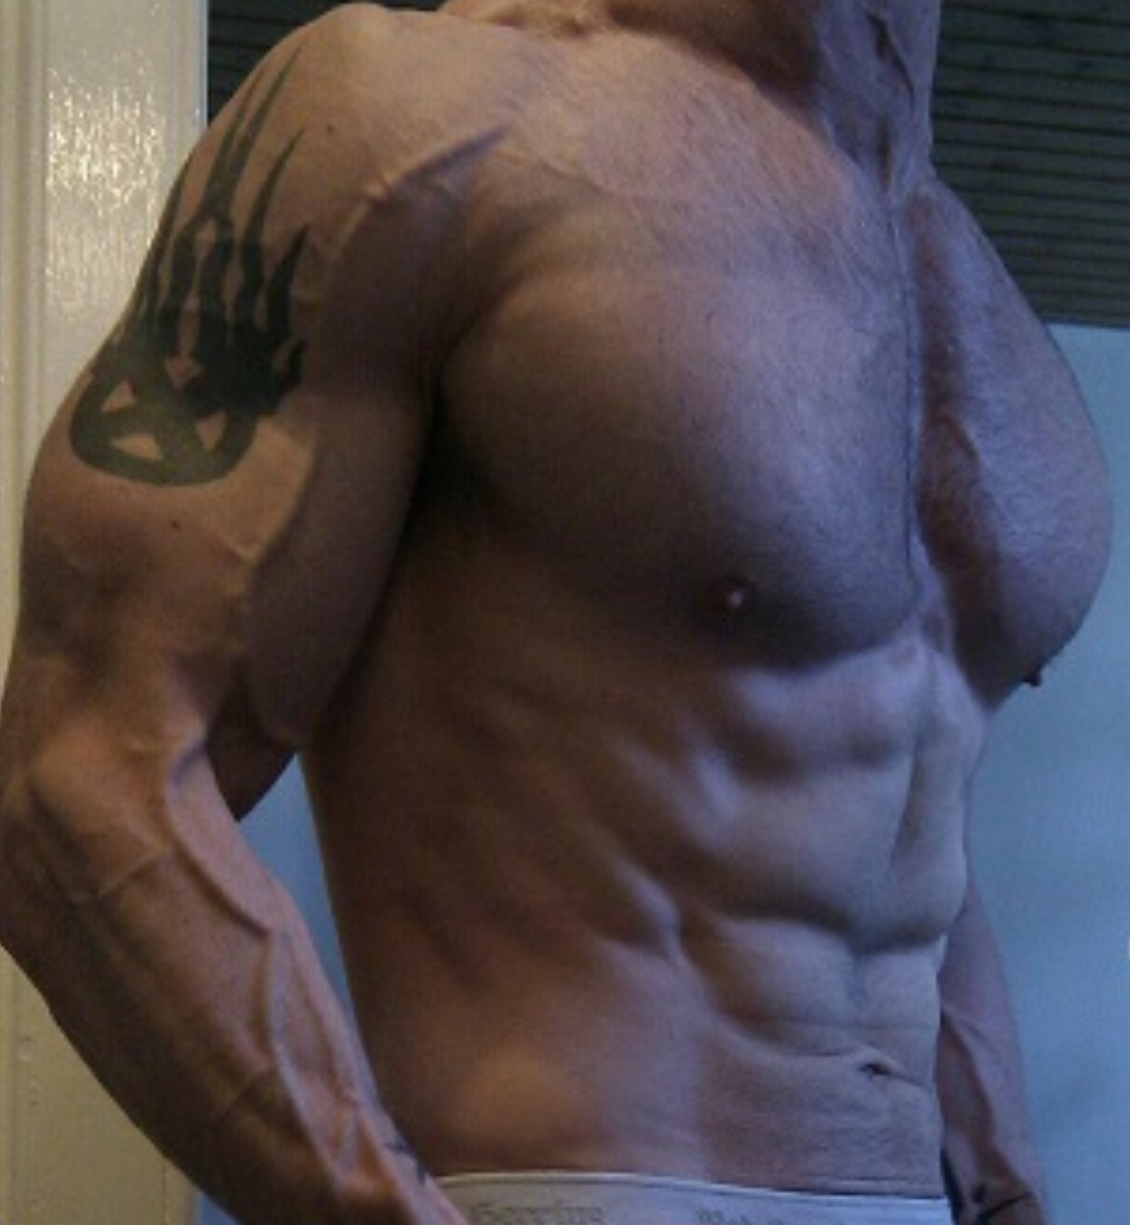 Torso shot of me with muscles showing